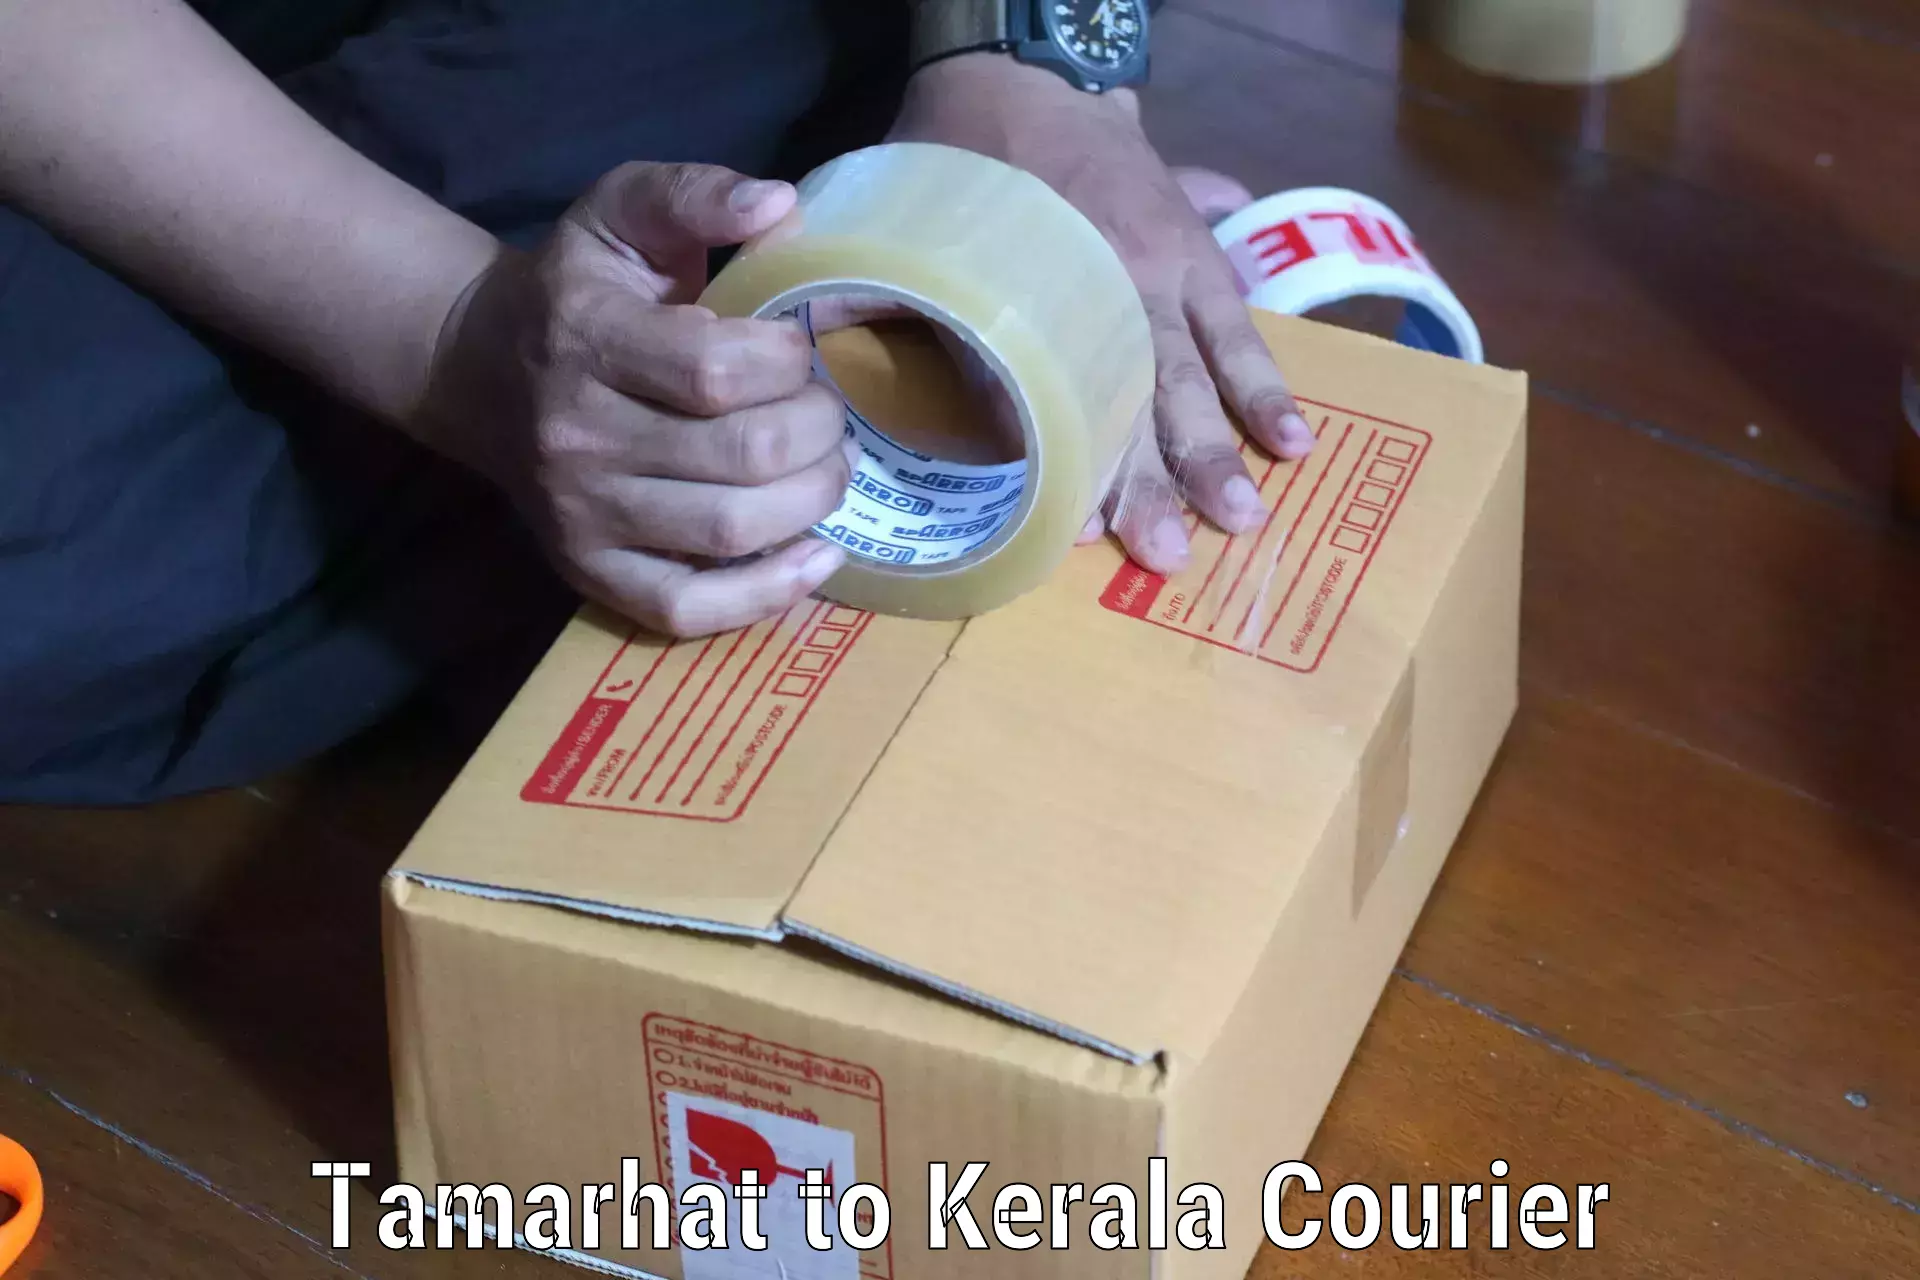 Overnight delivery services Tamarhat to Vaikom